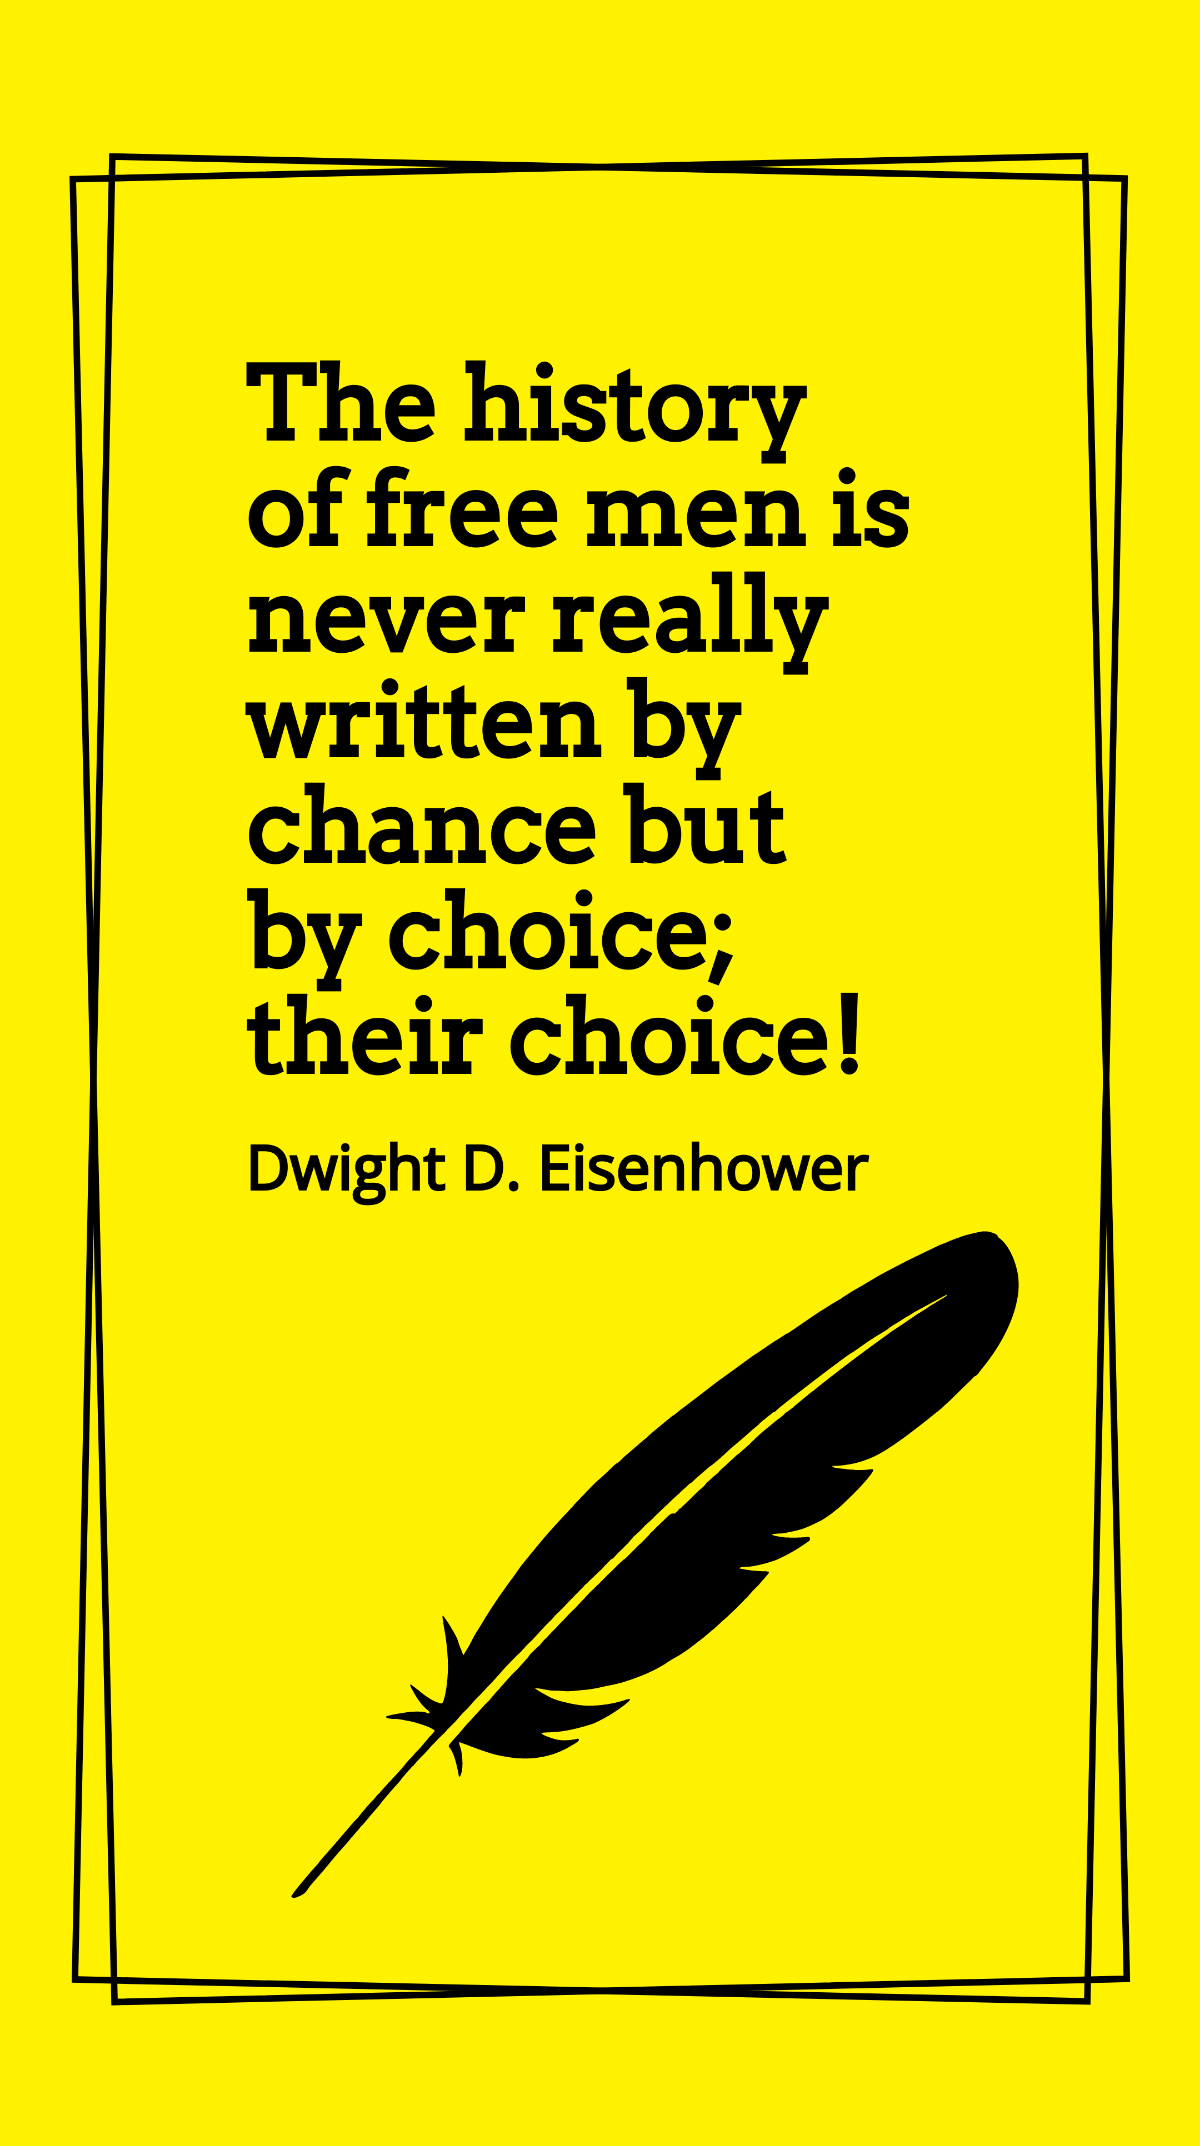 Dwight D. Eisenhower - The history of men is never really written by chance but by choice; their choice!